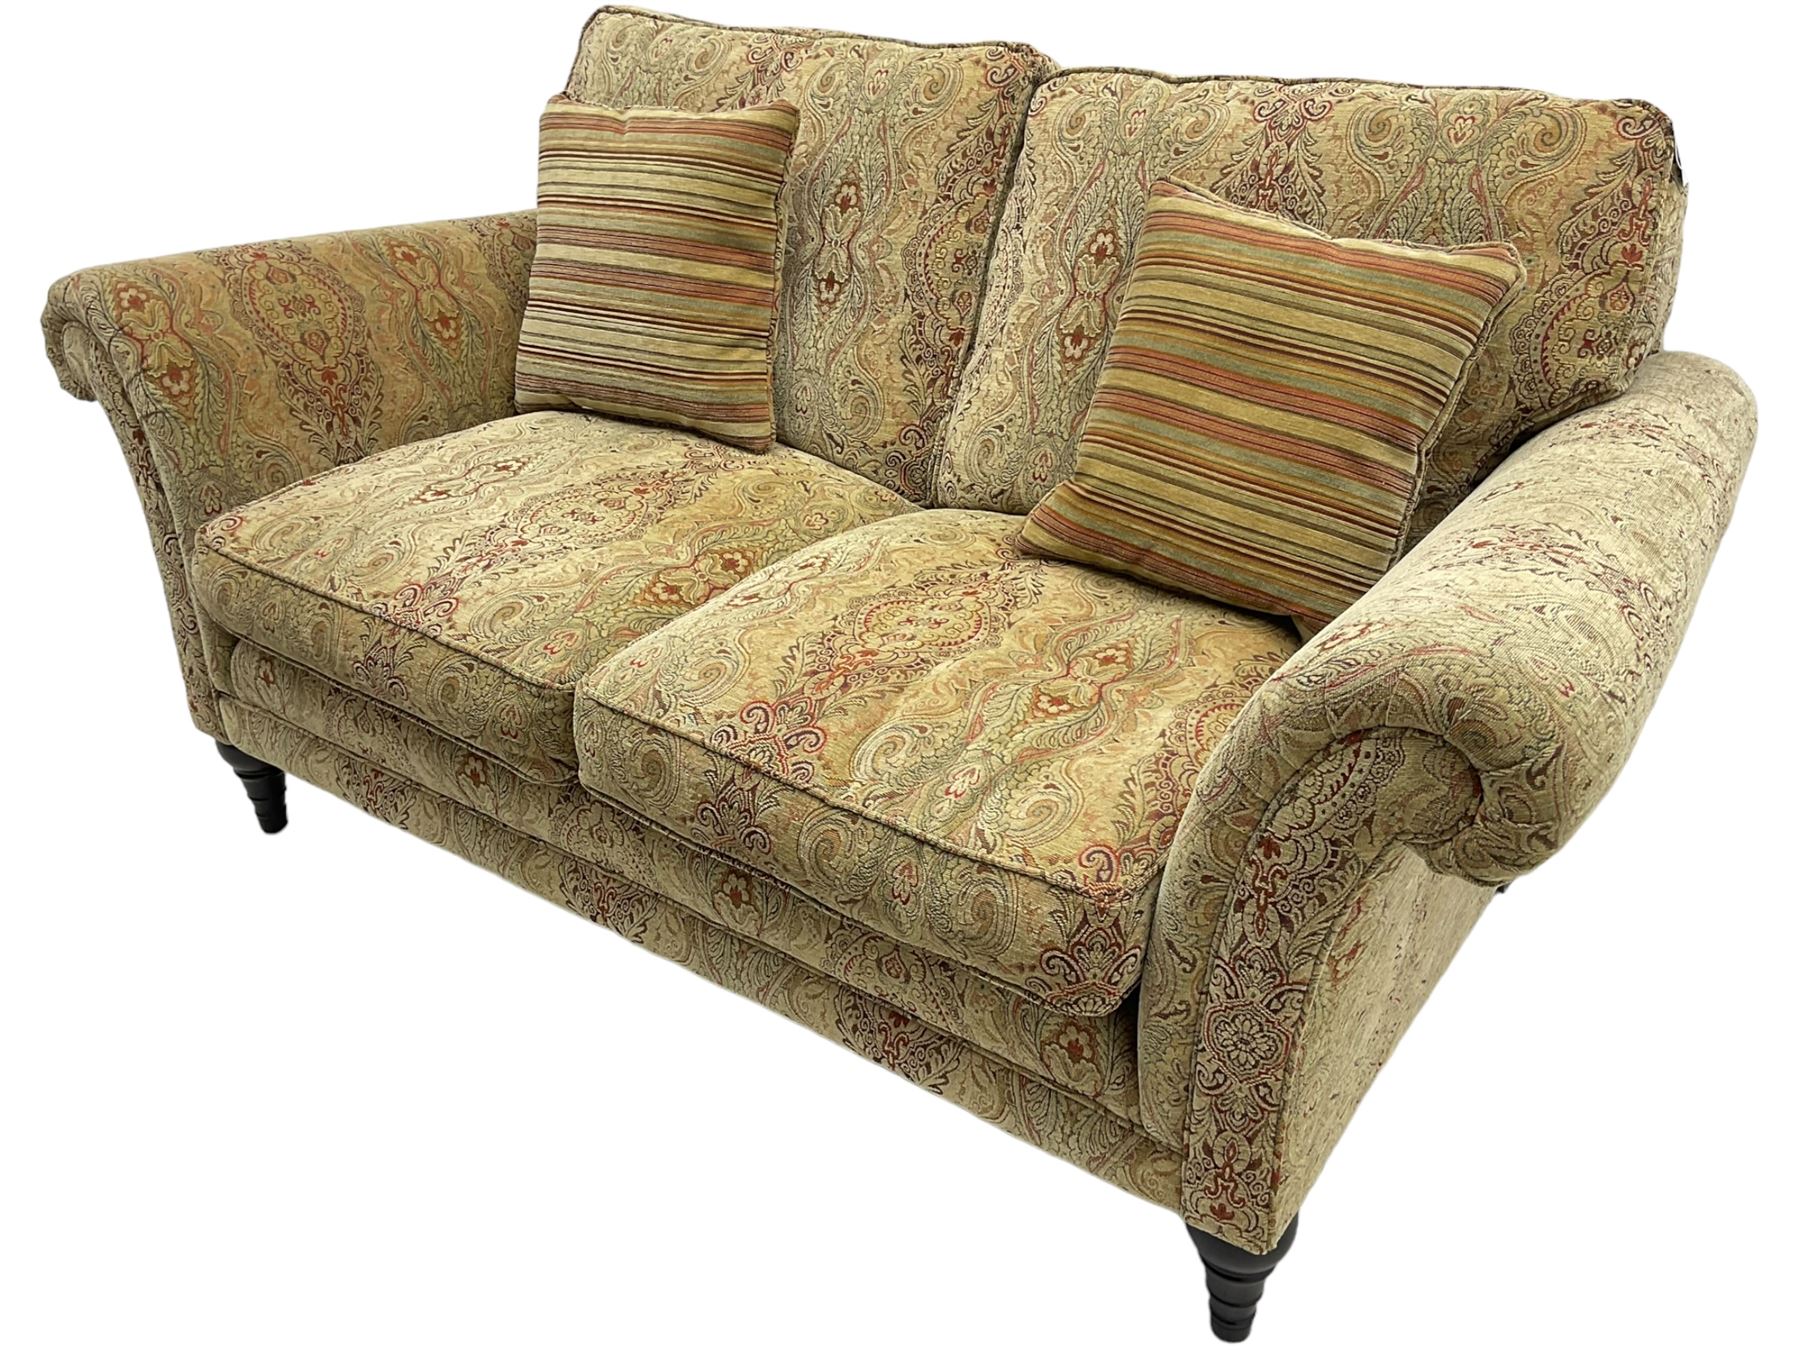 Parker Knoll - 'Burghley' two-seat sofa - Image 3 of 6